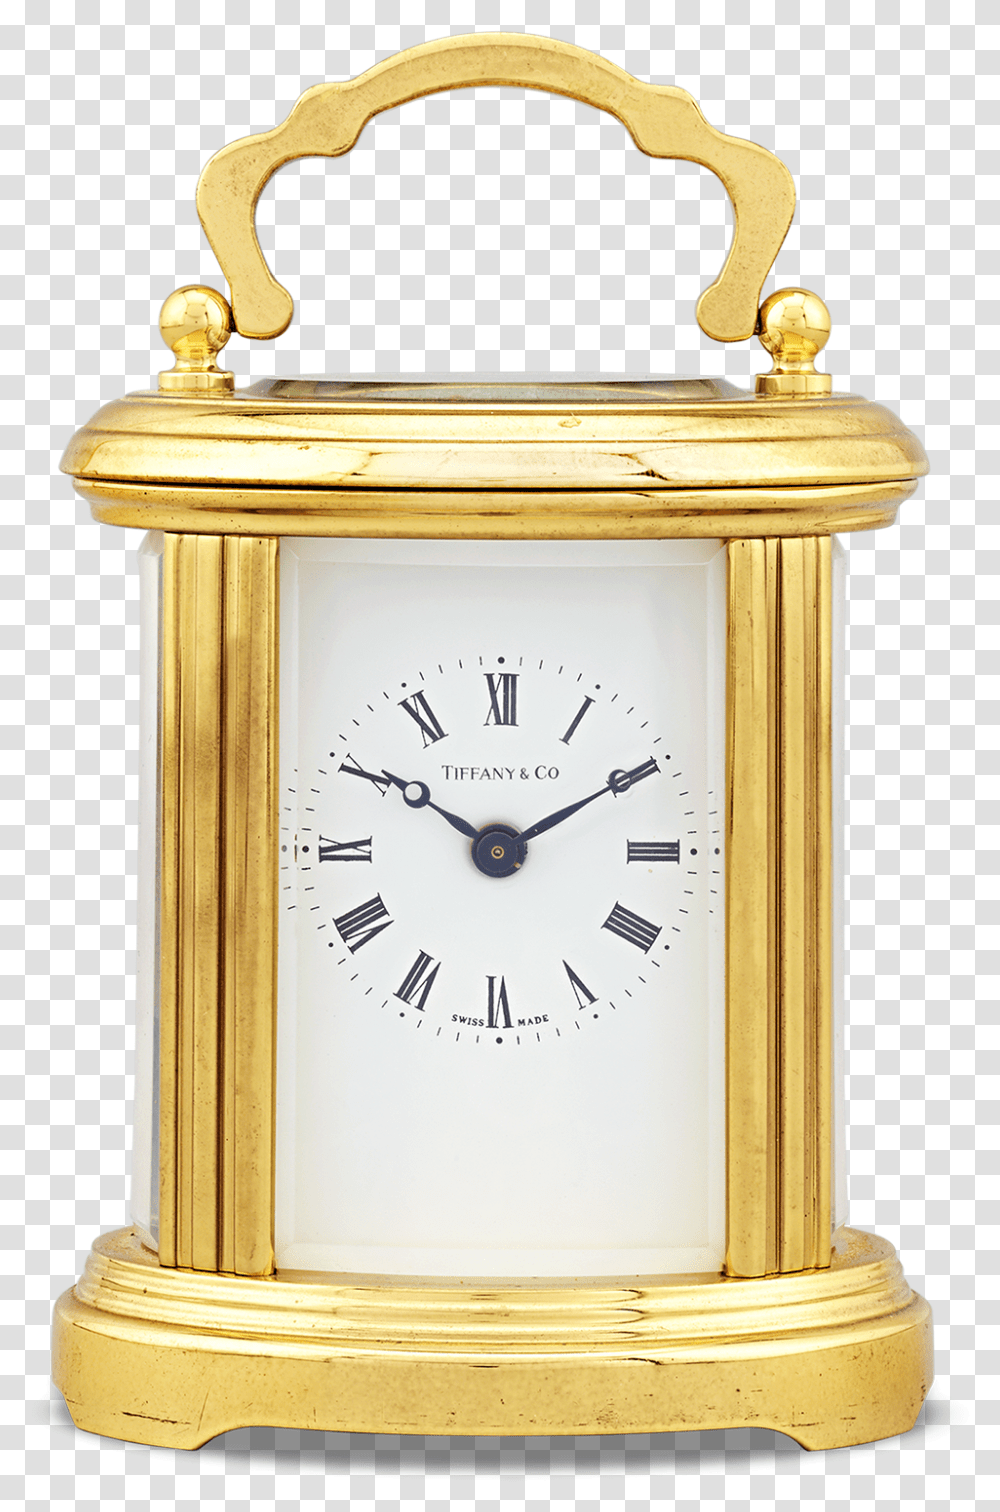 Carriage Clock By Tiffany Amp Co Quartz Clock, Analog Clock, Clock Tower, Architecture, Building Transparent Png